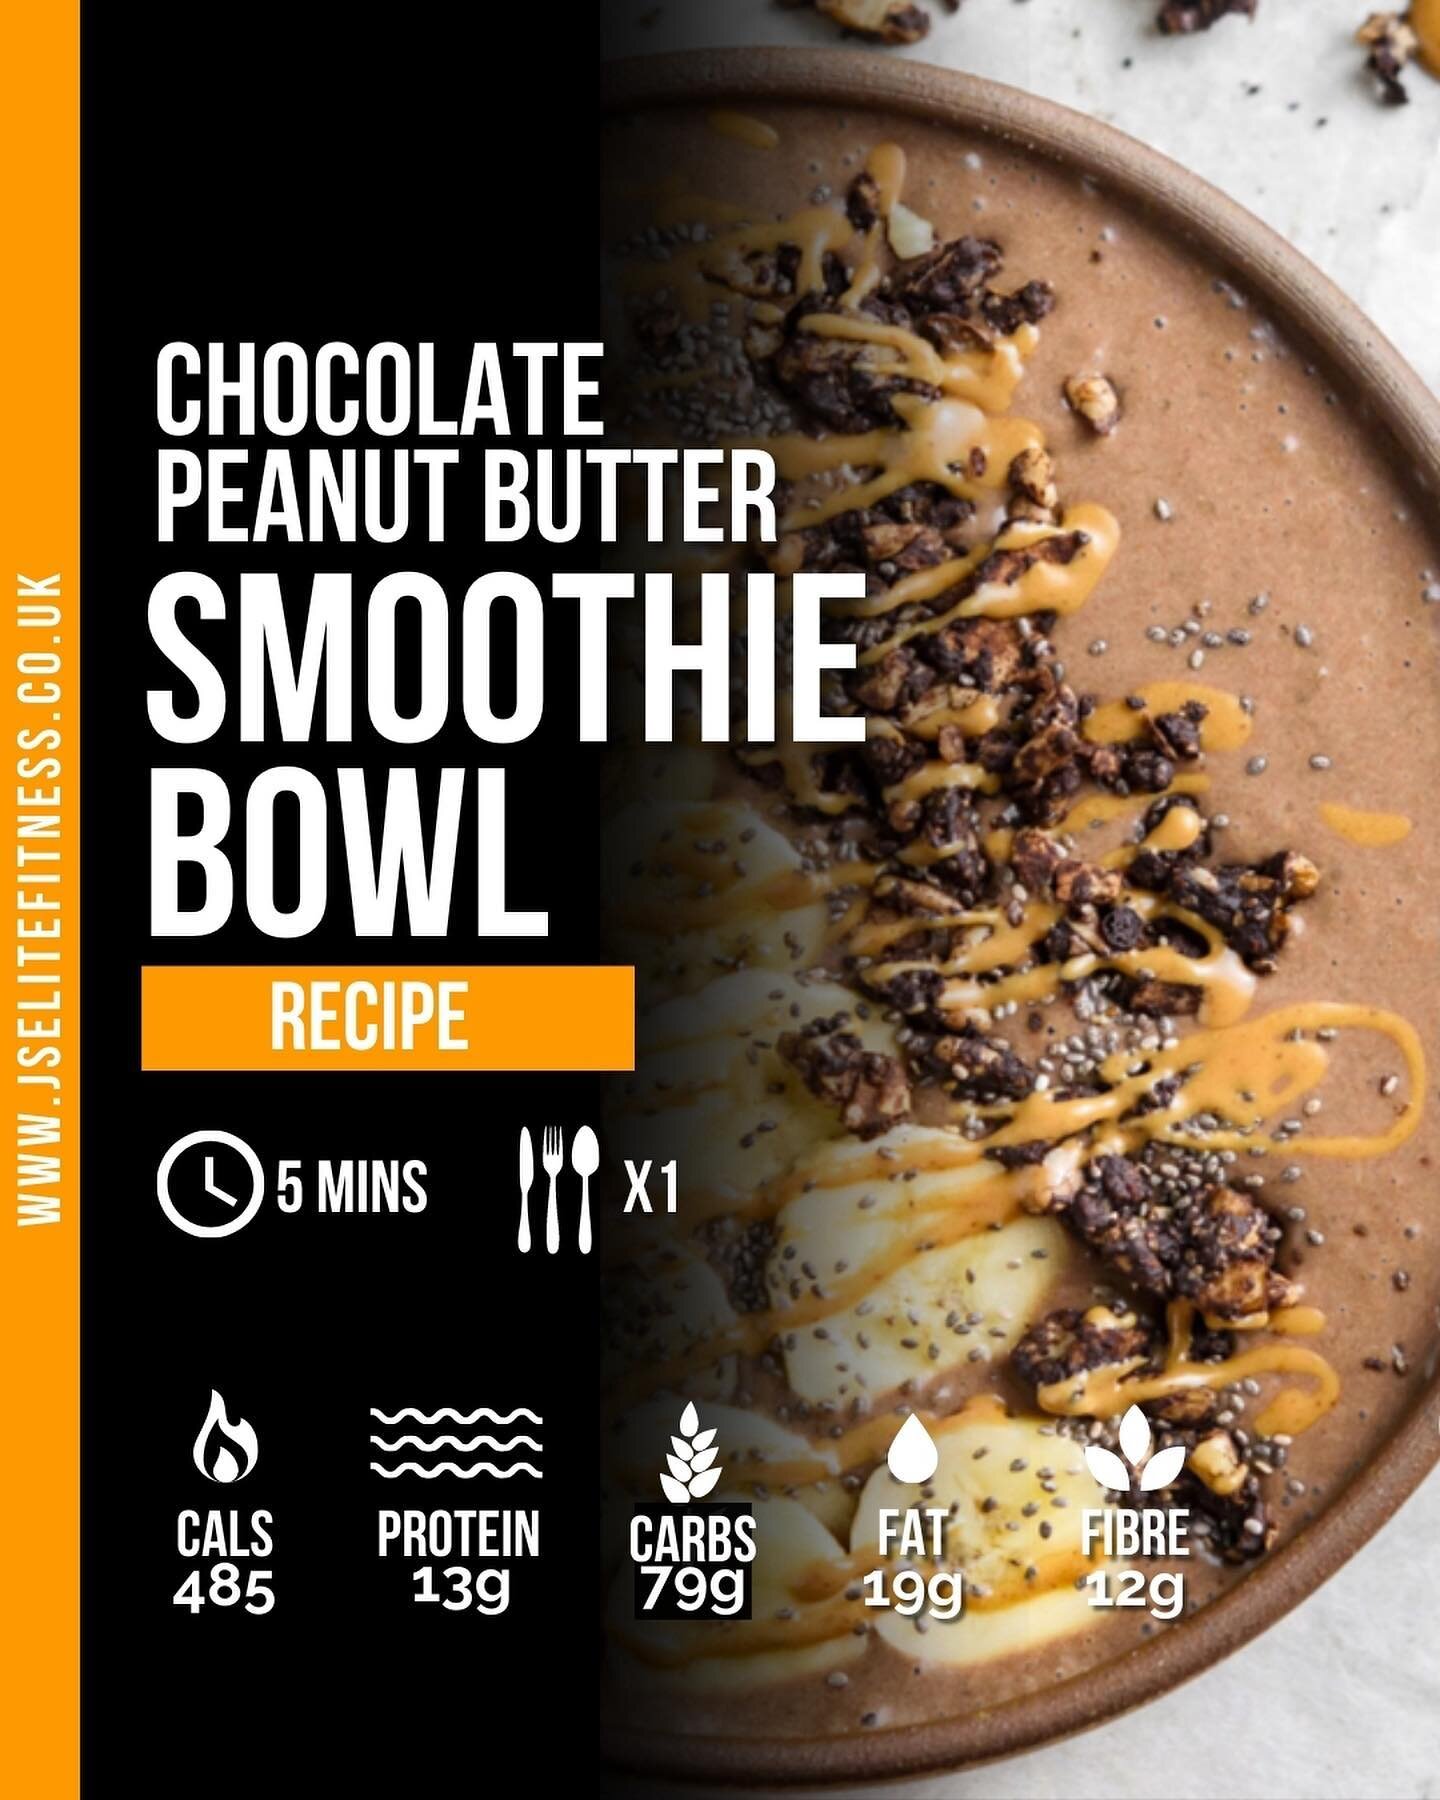 𝗛𝗶𝘁 𝗦𝗮𝘃𝗲 &amp; 𝗘𝗻𝗷𝗼𝘆 𝗟𝗮𝘁𝗲𝗿 🥣 ⁣
⁣
Stuck on ideas for breakfast? ⁣
⁣
Then why don&rsquo;t you give this smoothie bowl a go? ⁣
⁣
Simple, quick &amp; easy to make, and will keep hunger at bay for longer than your typical bowl of cereal 